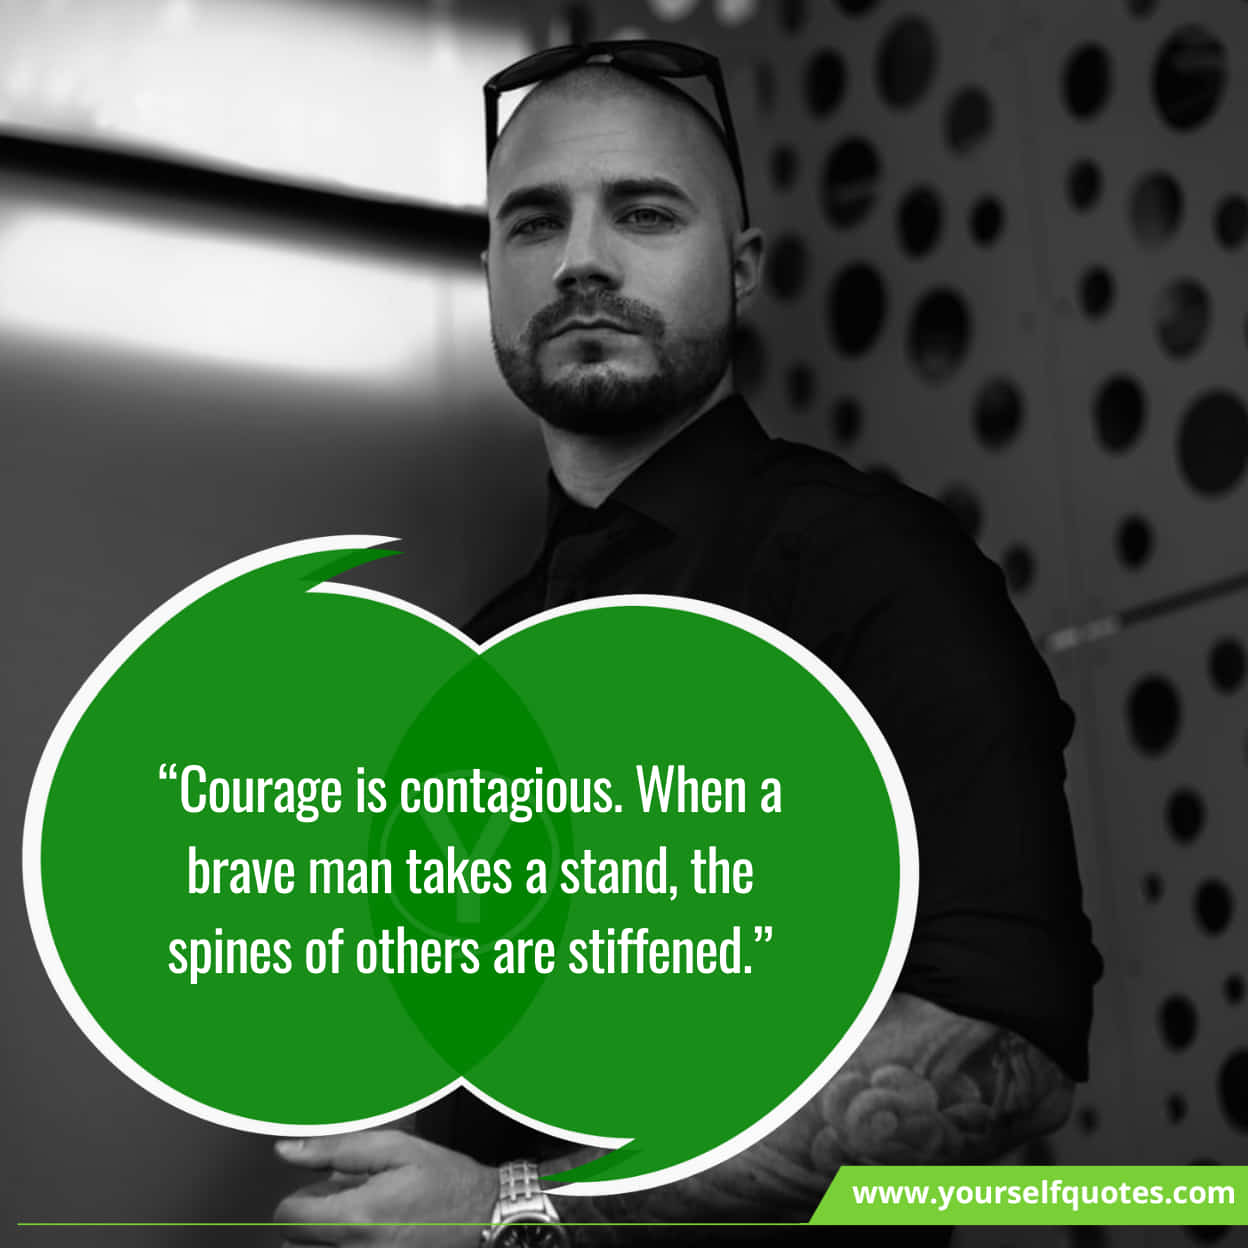 Best Quote Of The Day On Courage